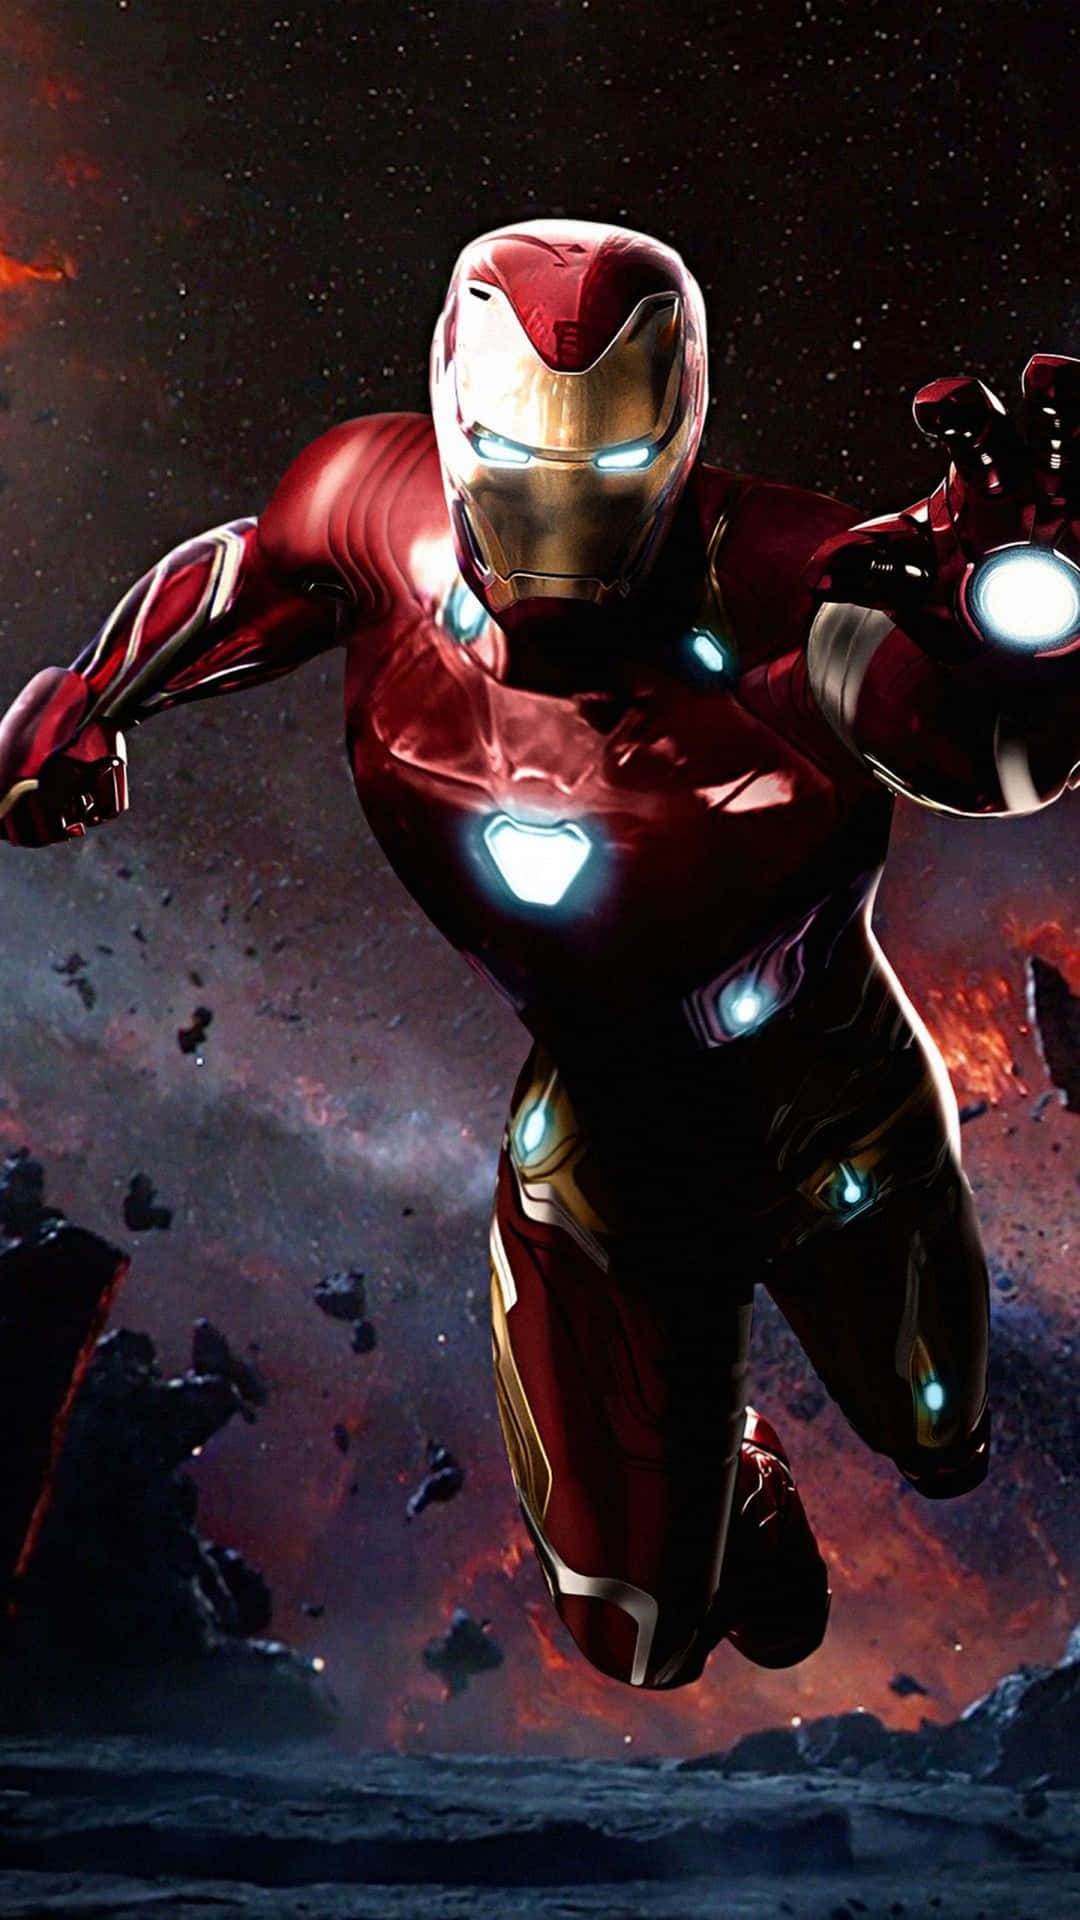 Get ready to experience Iron Man at its highest resolution with this 4k Mobile Wallpaper